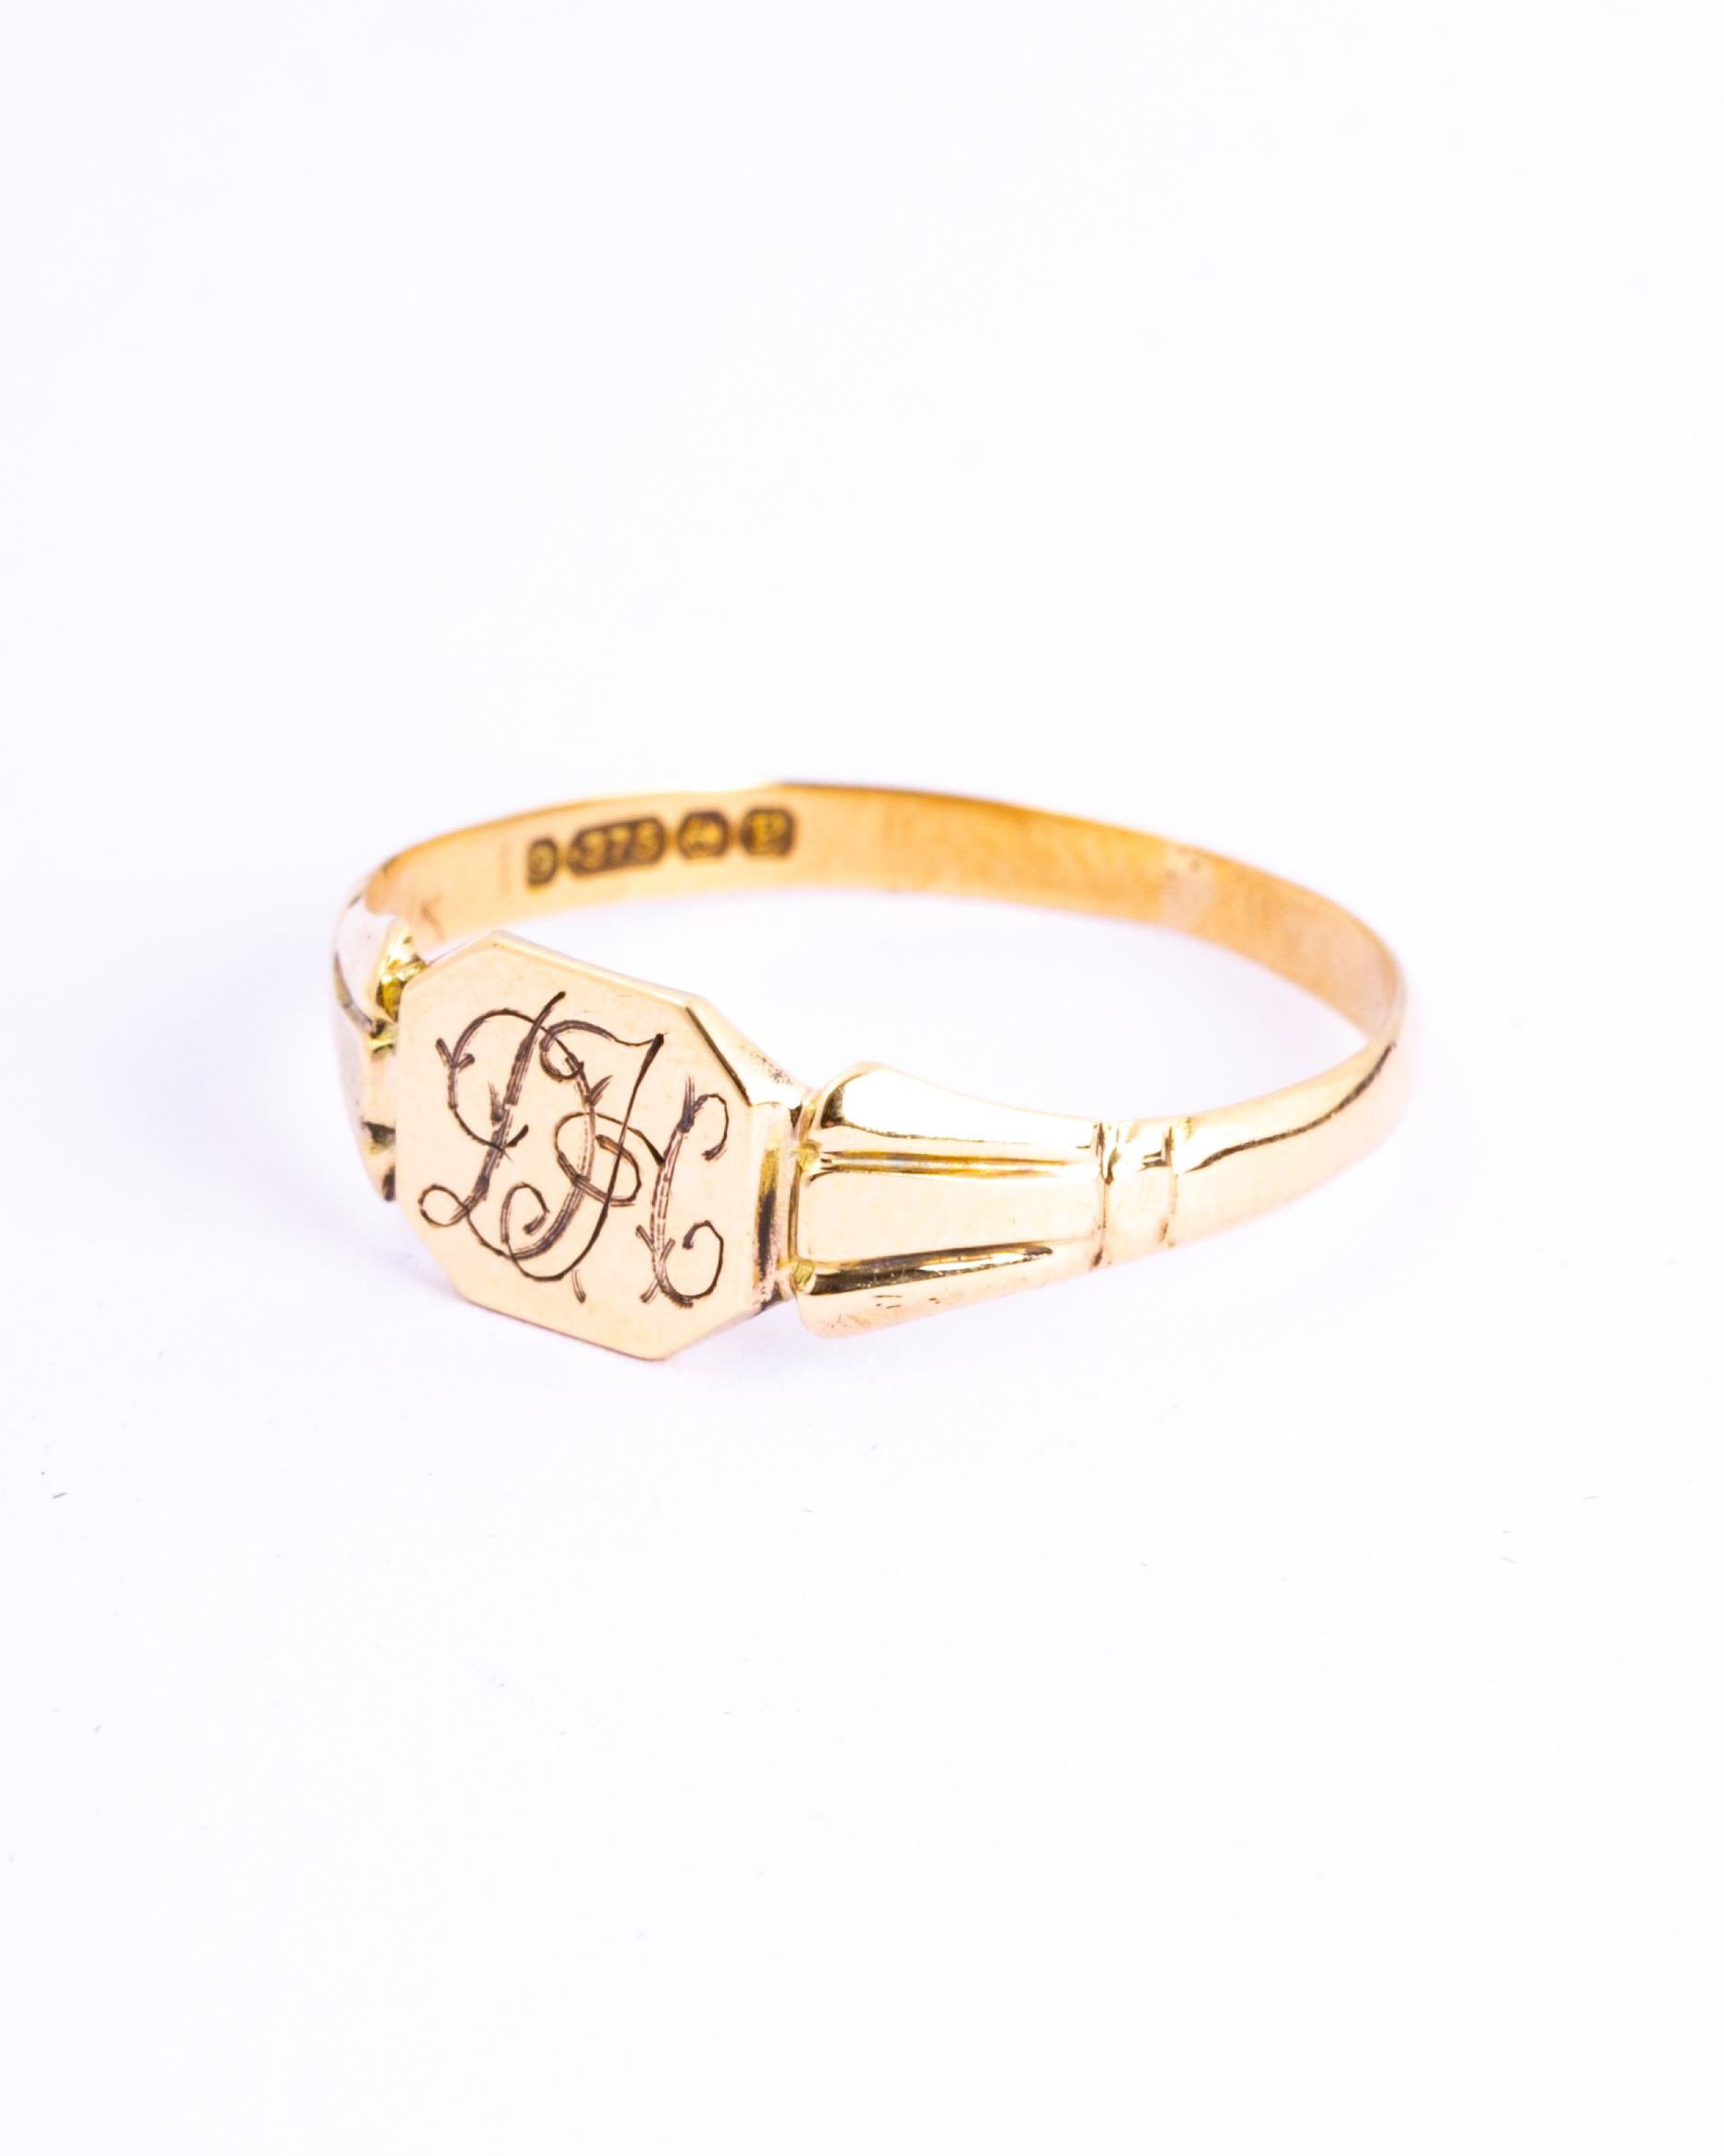 This signet ring has a face with the initials DH engraved into it. Either side of the face is shell style detail and is modelled in 9ct gold. 

Ring Size: S or 9
Face Dimensions: 7x8mm

Weight: 1.3g